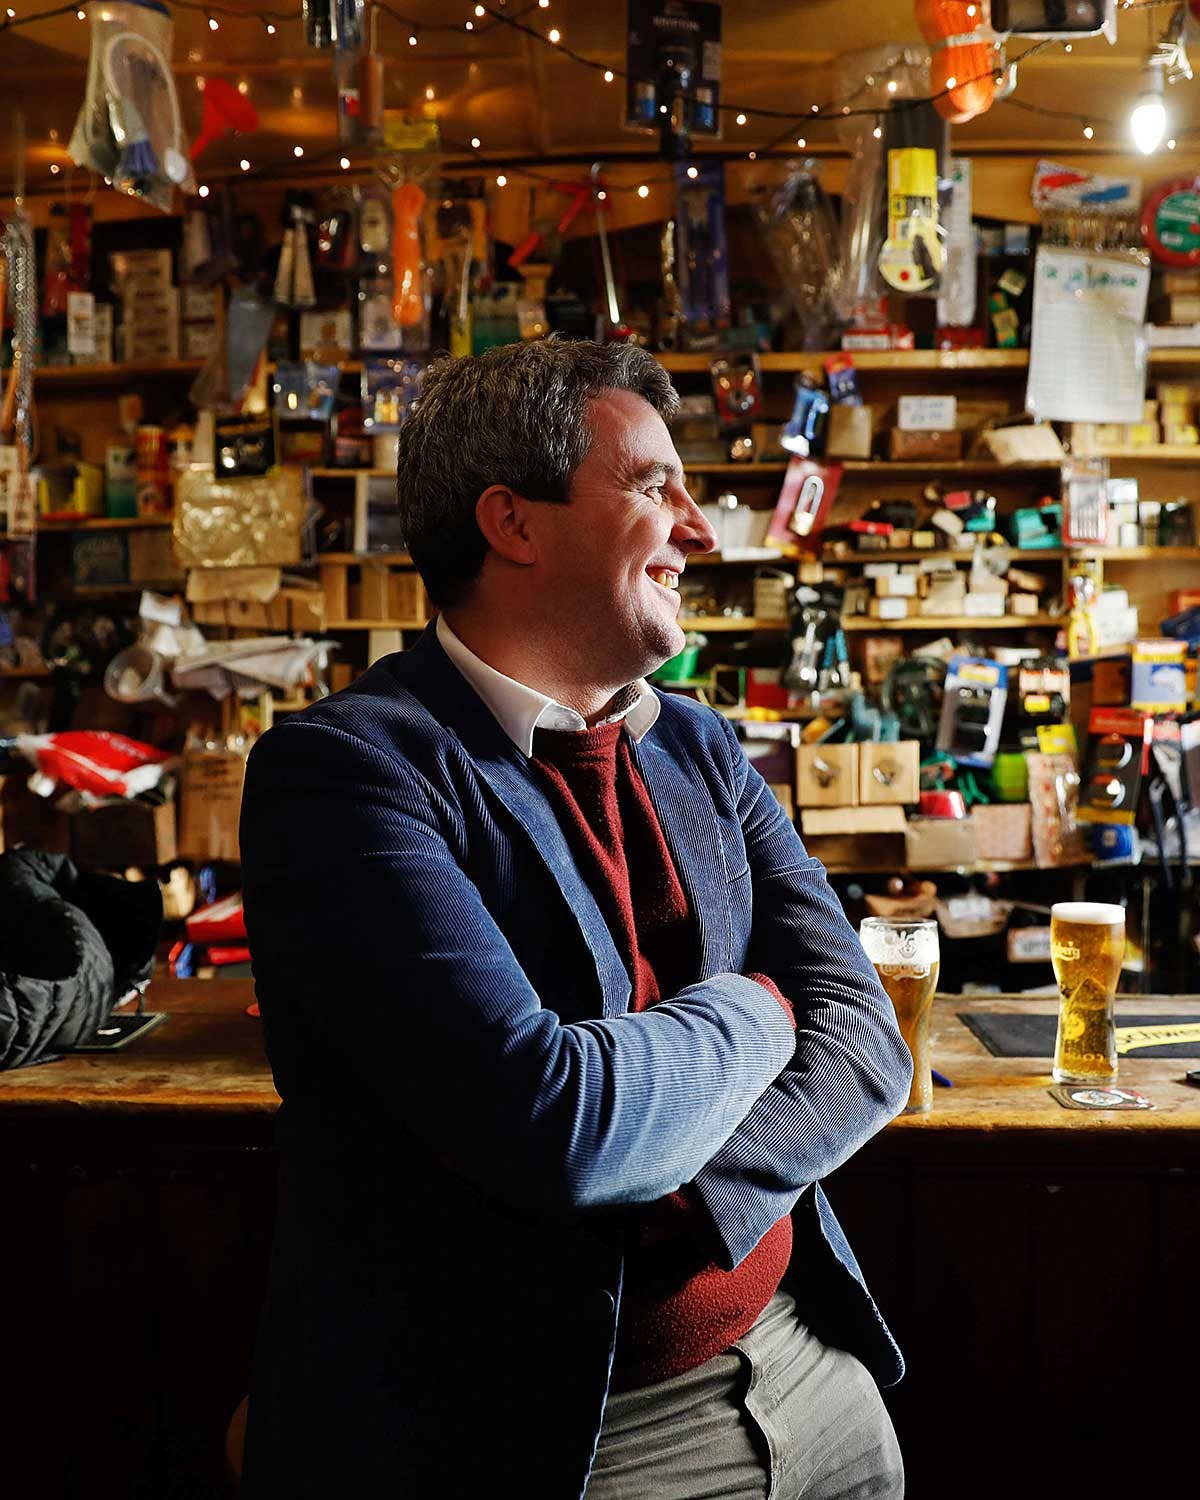 Welcome to the World’s Greatest Pub Town: Dingle, Ireland